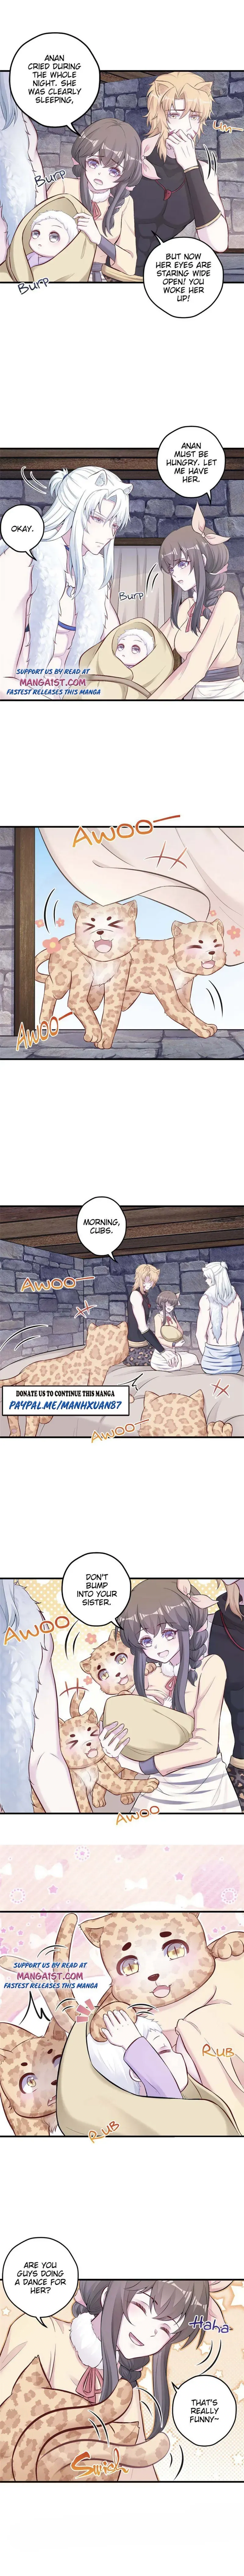 Beauty and the Beasts Chapter 441 page 4